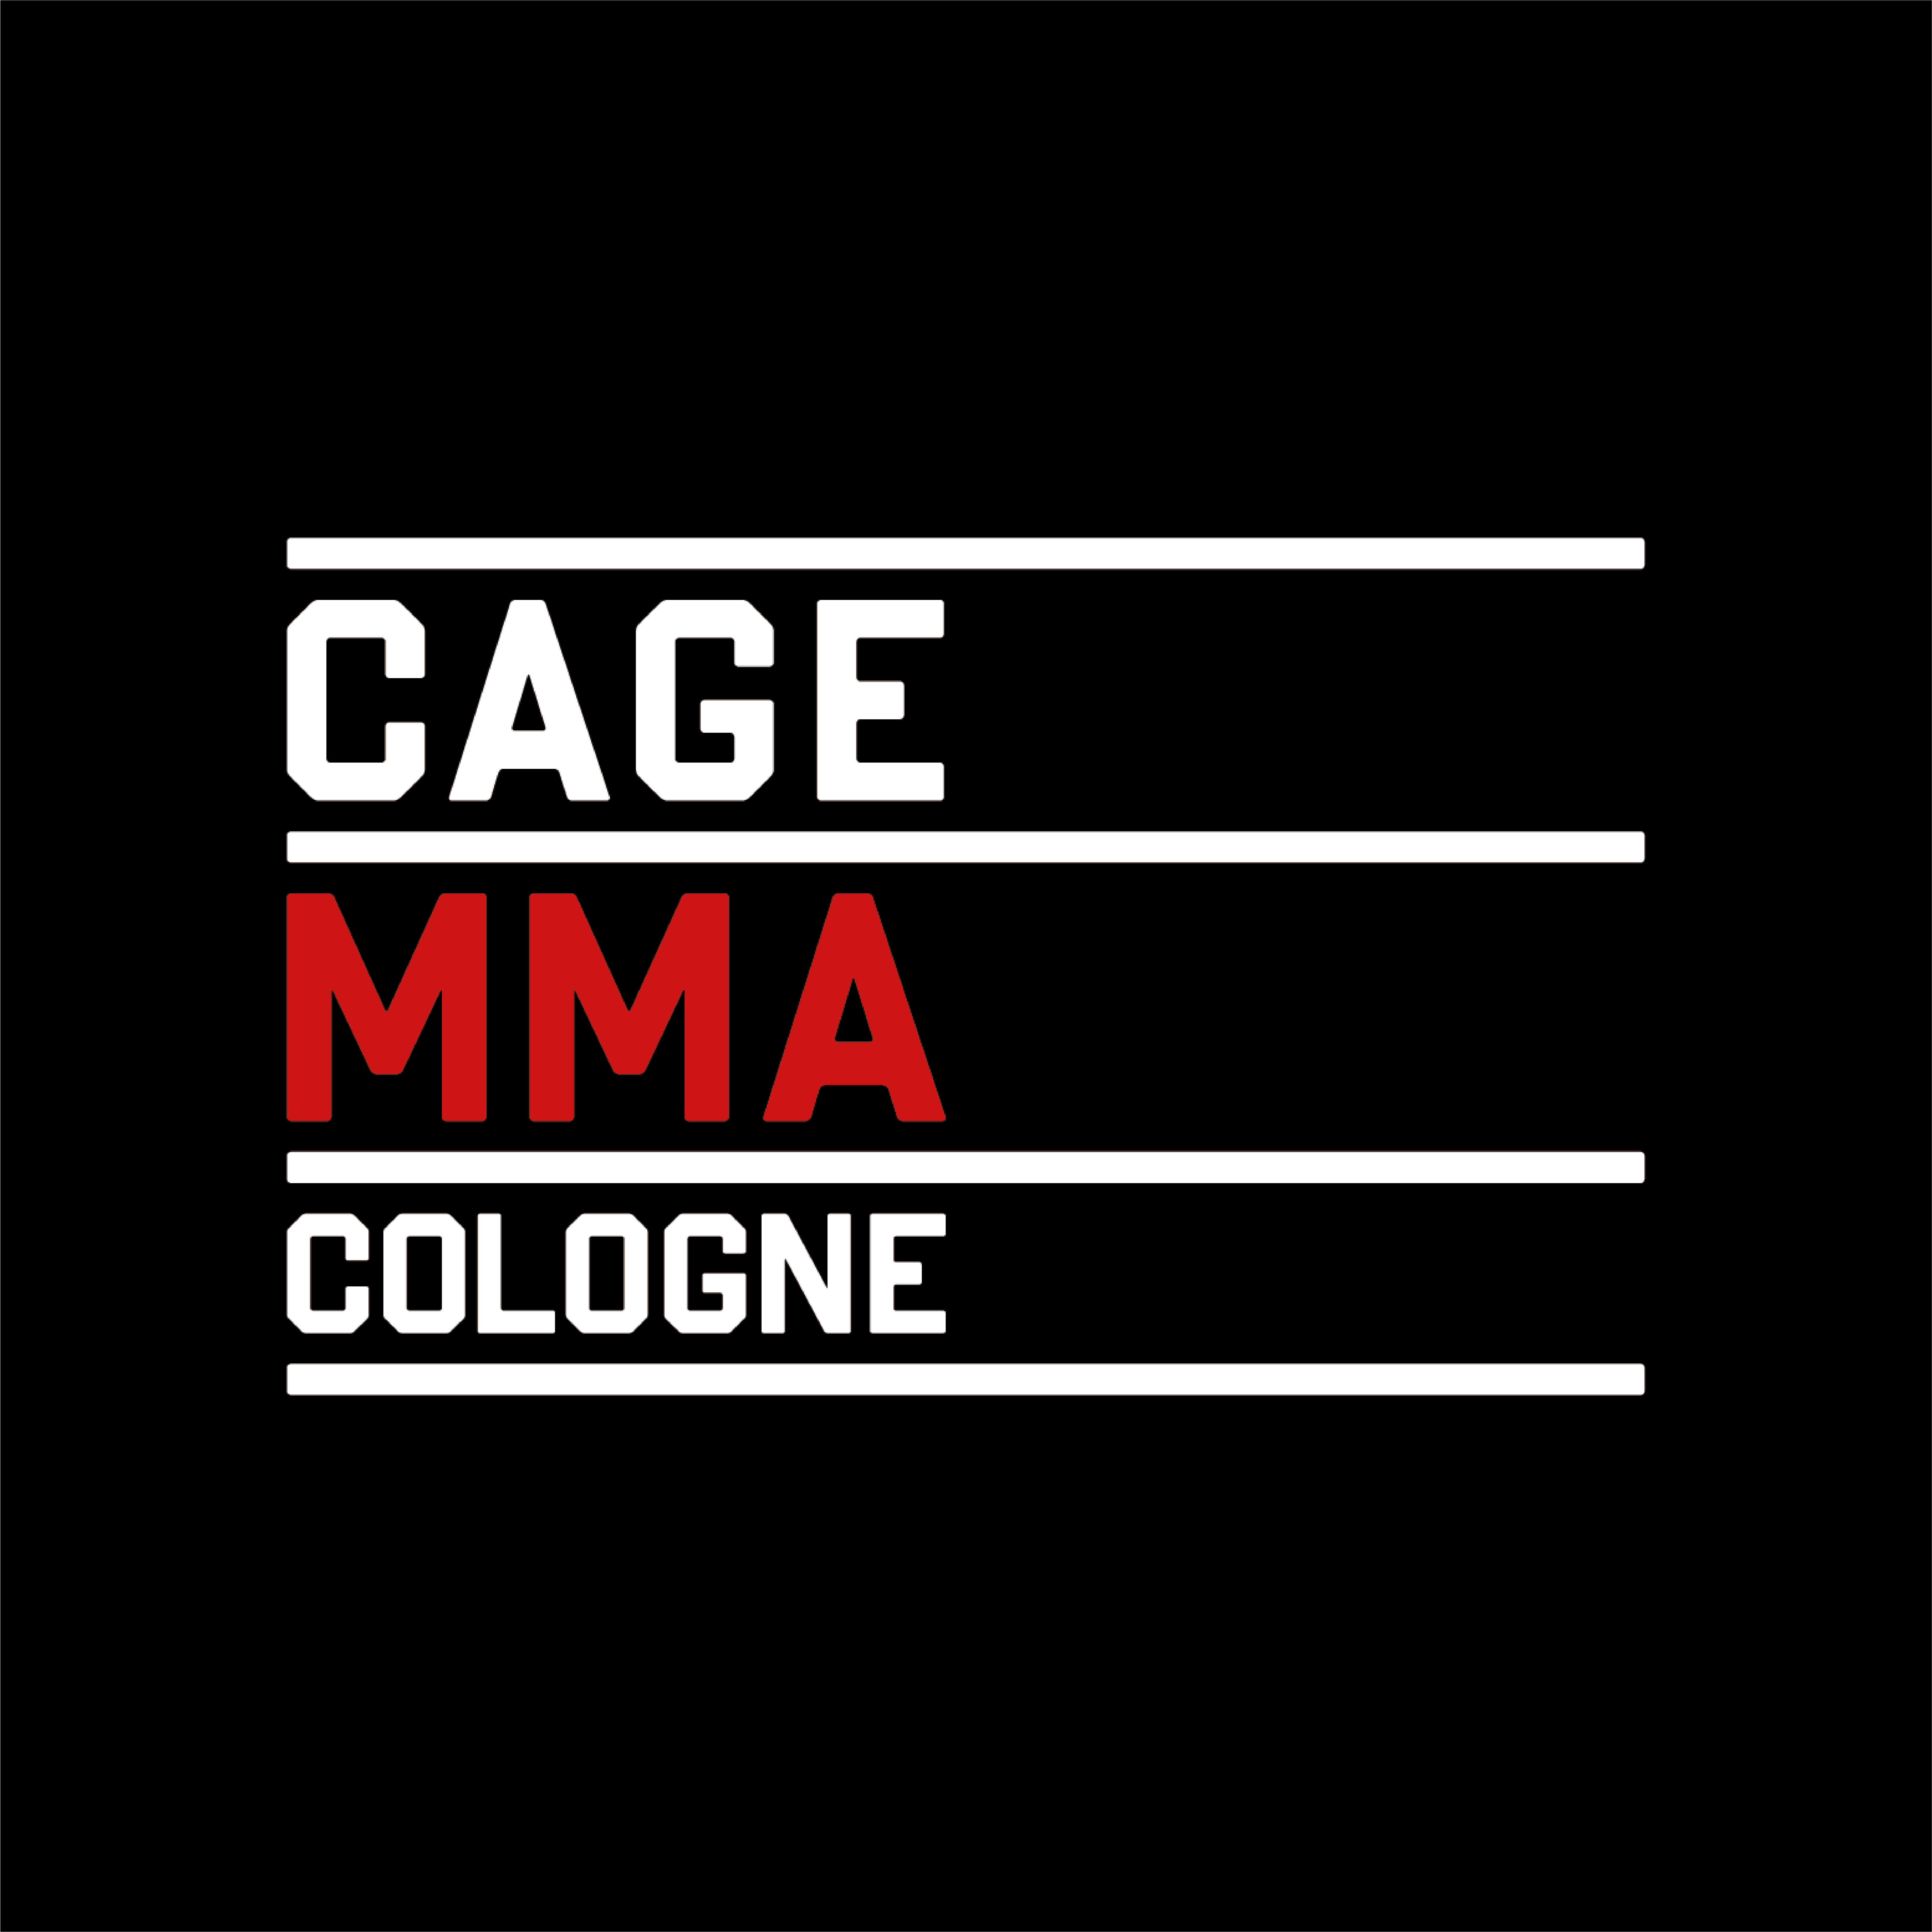 CAGE MMA COLOGNE NIEHL  